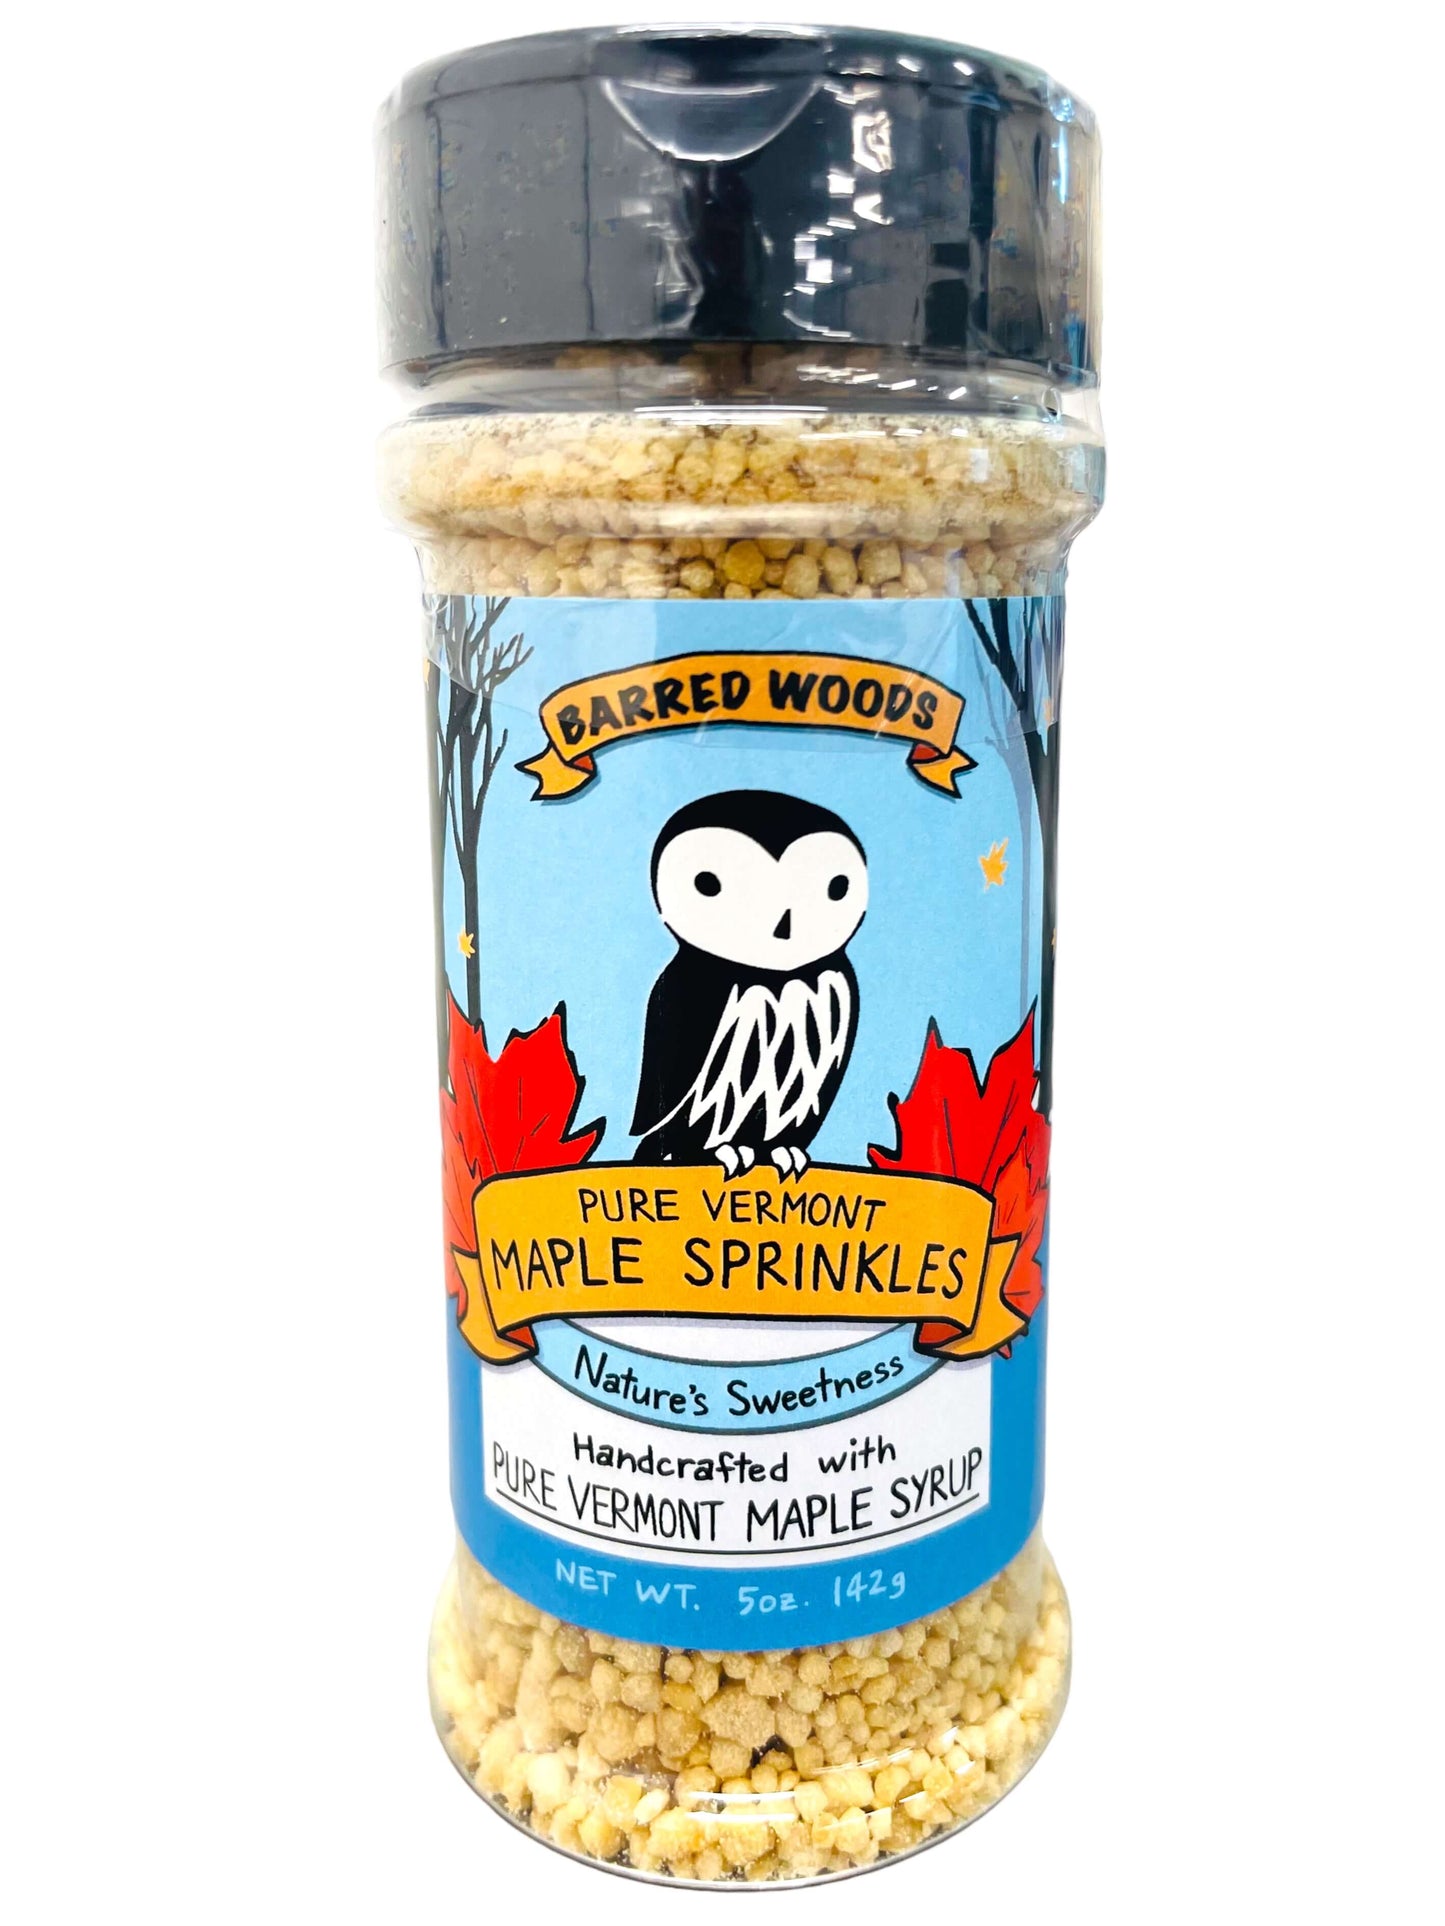 Pure vermont maple sugar sprinkles. These small maple pebbles provide a nice maple crunch